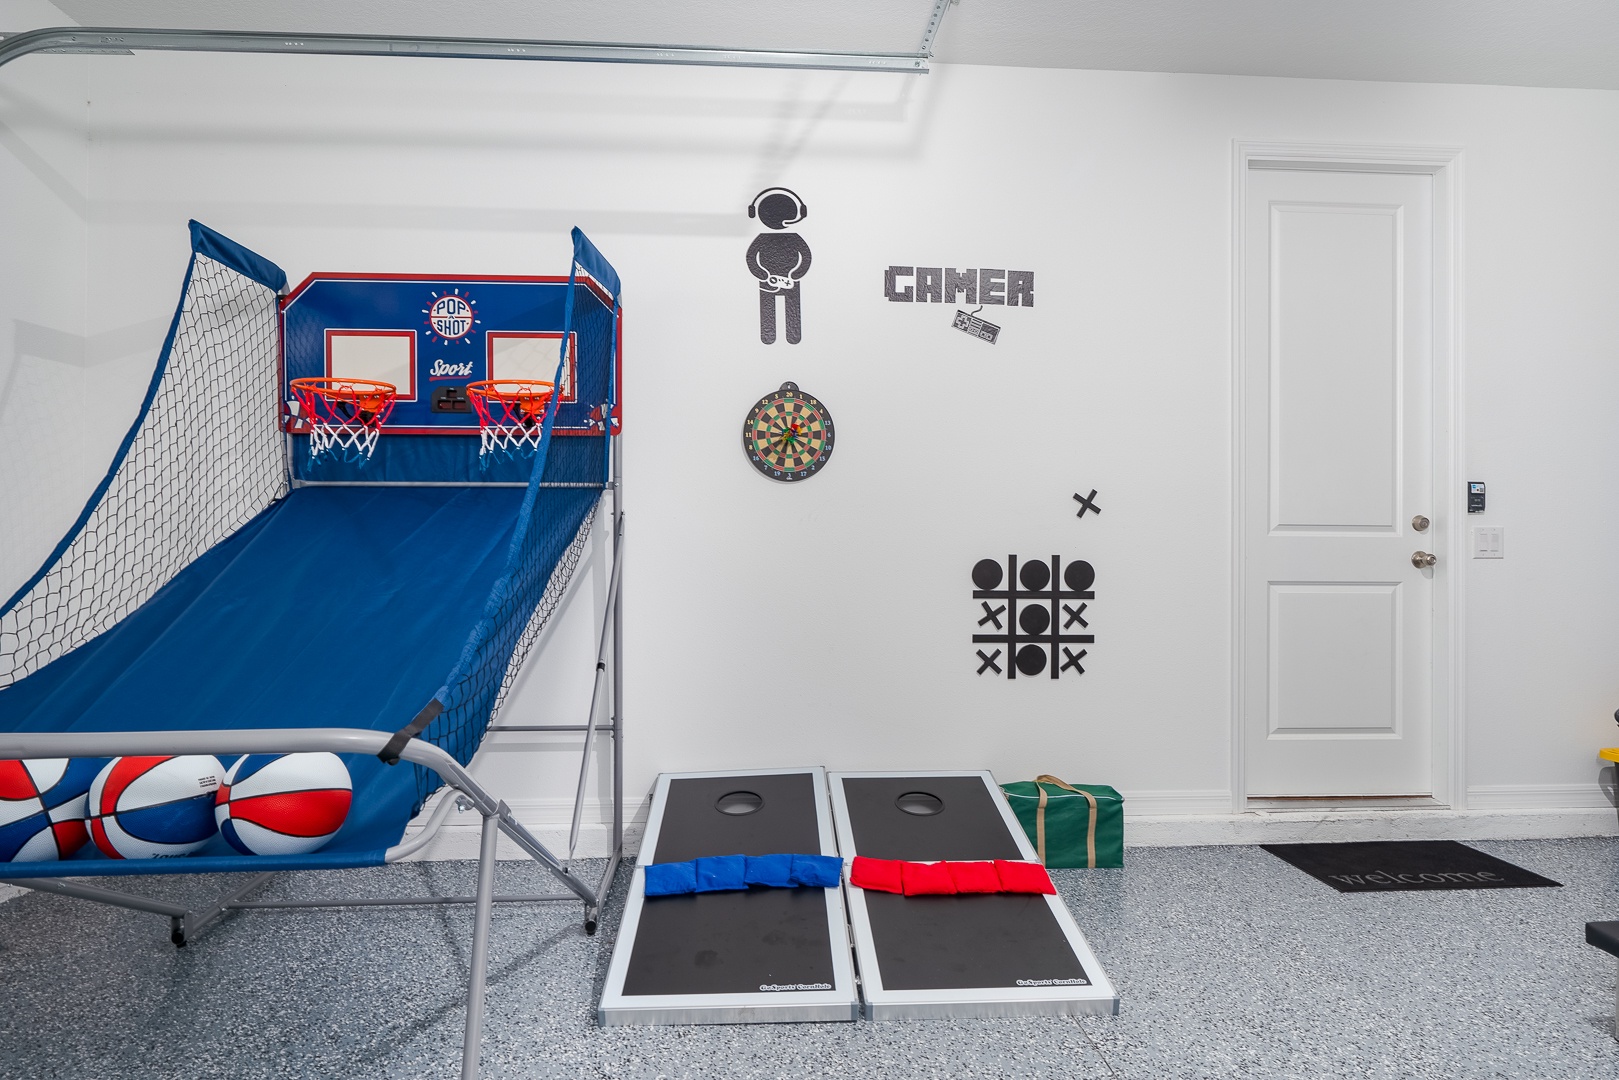 Head into the garage game room & unleash your competitive side